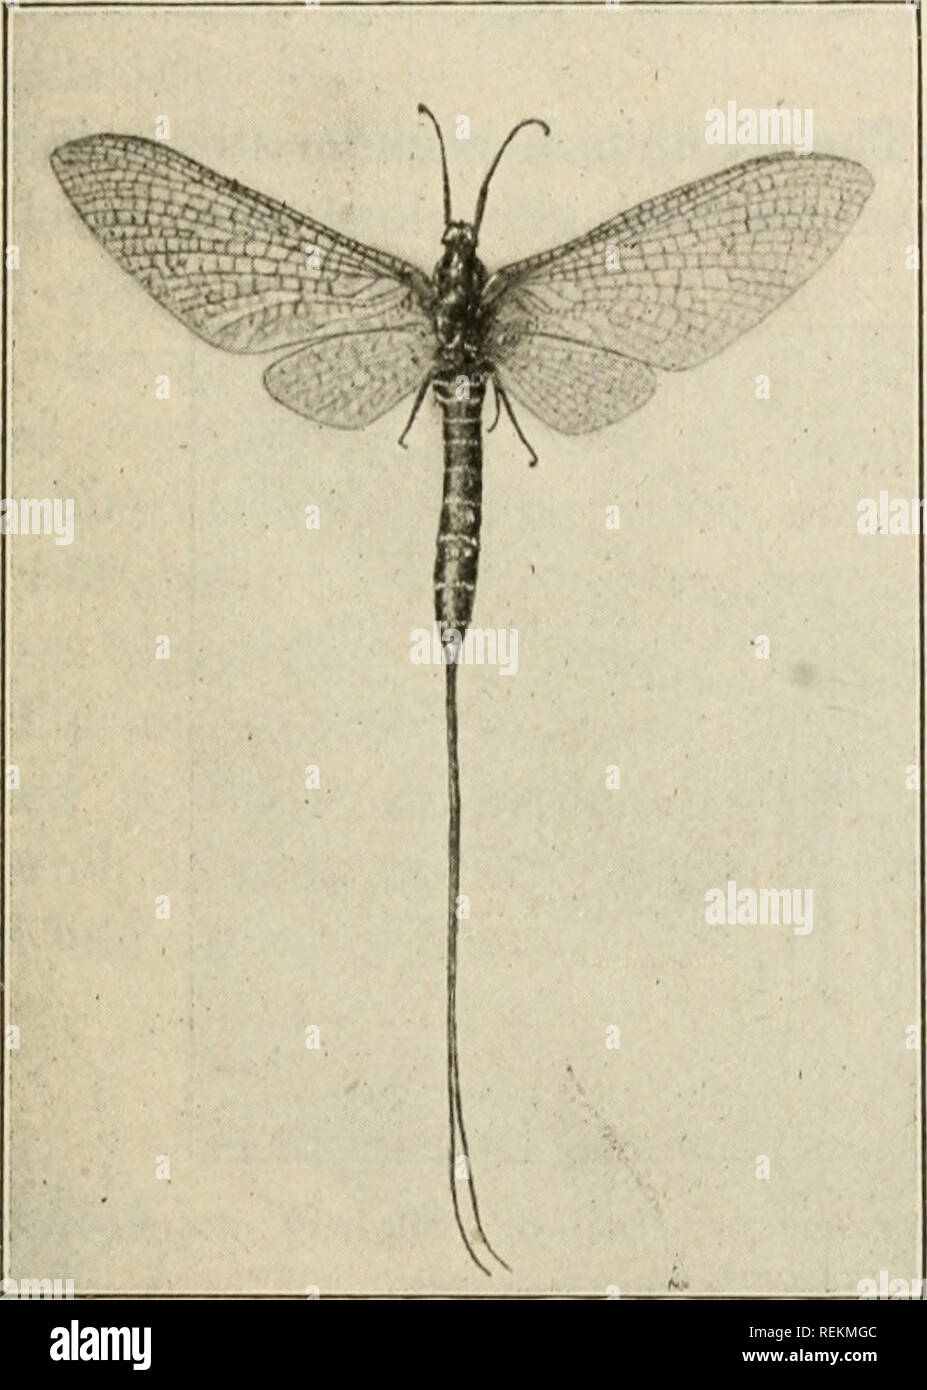 . Class book of economic entomology. Insects, Injurious and beneficial. [from old catalog]; Insects; Insects. CLASSIFICATION AND DESCRIPTION OF COMMON INSECTS 97 C. Abdomen with 2 or 3 long filaments; lower wings much smaller than upper; antenna; short.—Ep/icnicrida (May-flies) (Fig. 53). CC. Abdomen without jointed filaments; wings about equal in size; antennae short. Odonata (Dragon-flies). The larvae of most of the Neuropteroid insects are aquatic and are of little economic importance in agriculture. They are of importance, however, in fish- culture. In the Stone-flies Newcomer has recently Stock Photo